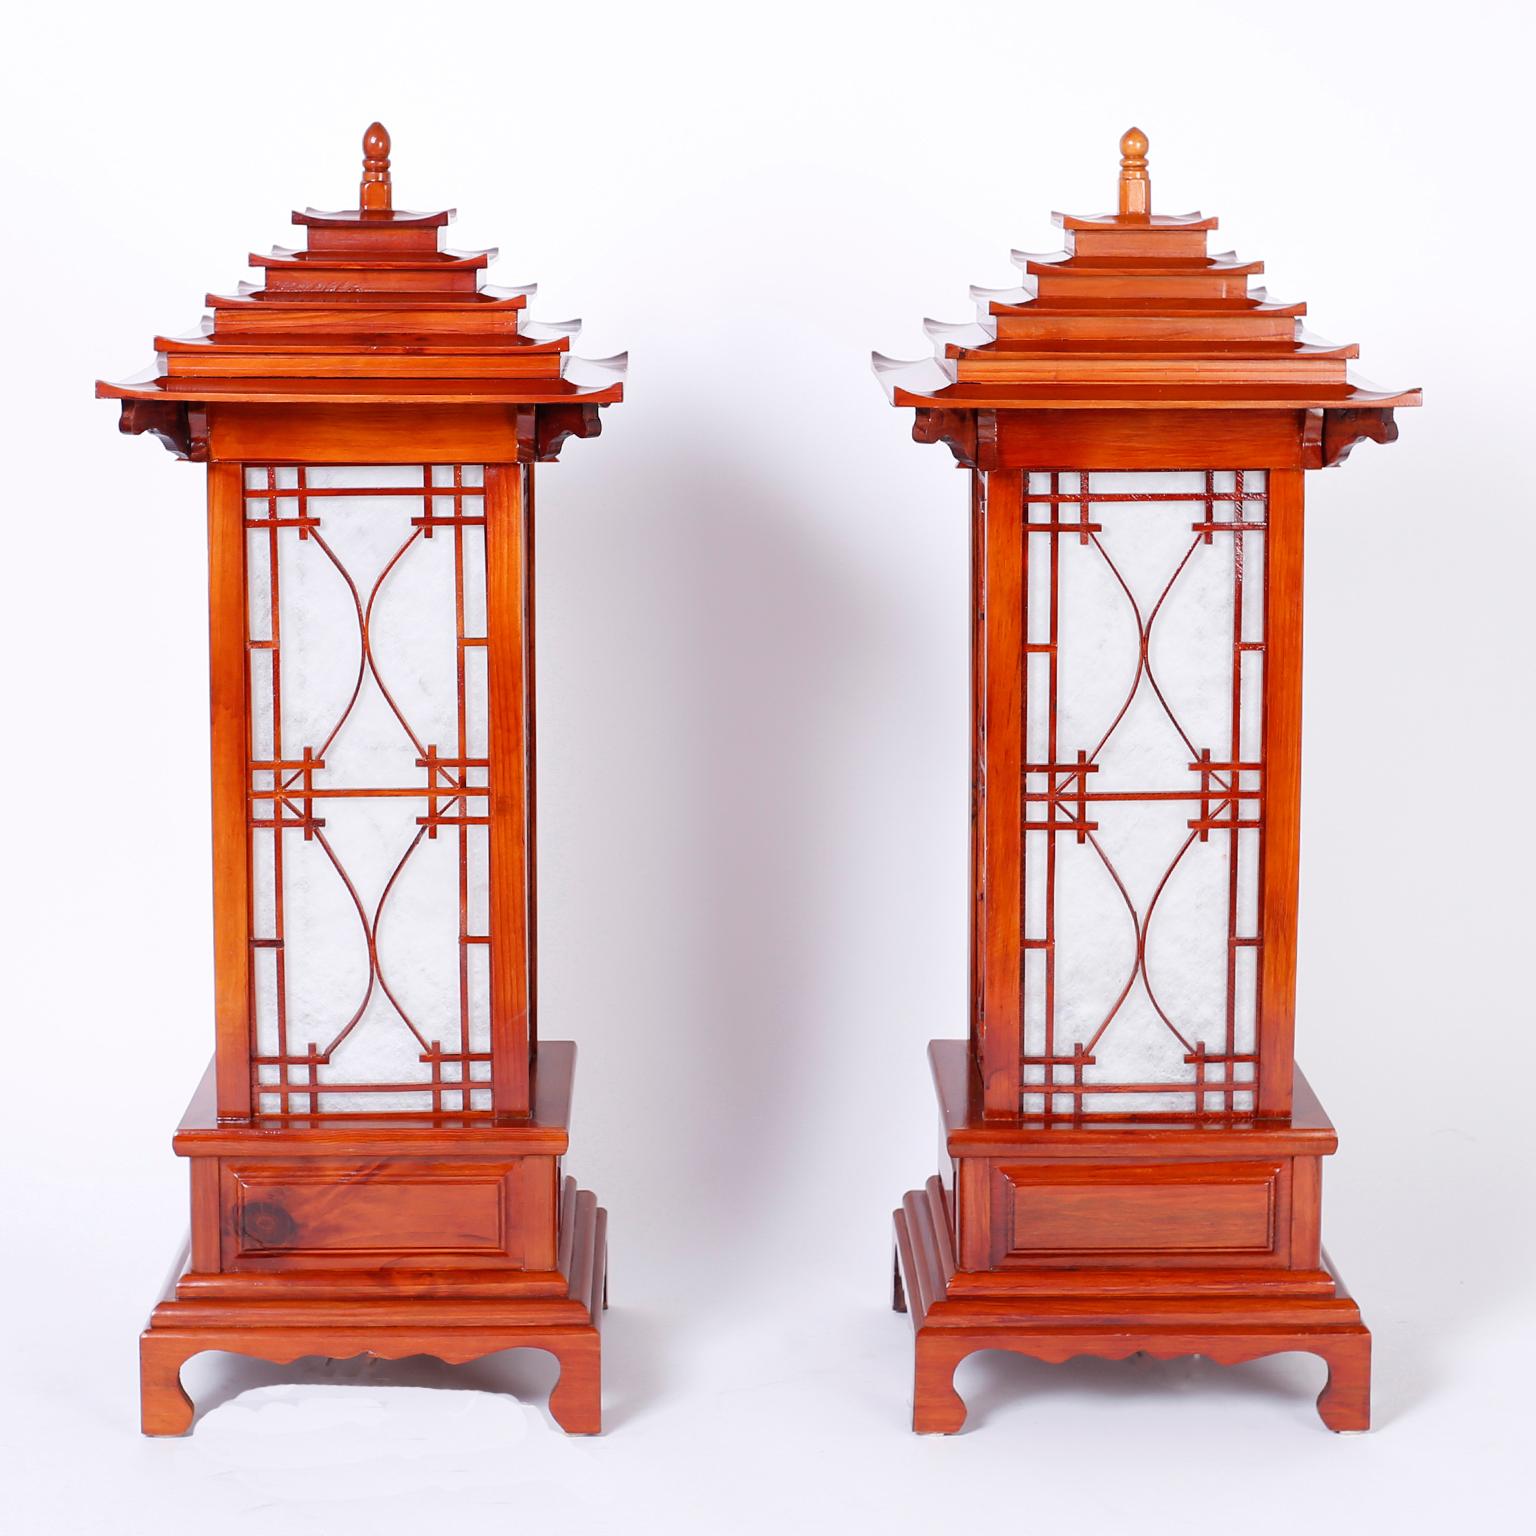 Striking pair of table lamps with a classic pagoda form and strong architectural presence, crafted in pine and each having four panels of pearlized plastic light defusers that glow in mood or brighter light.